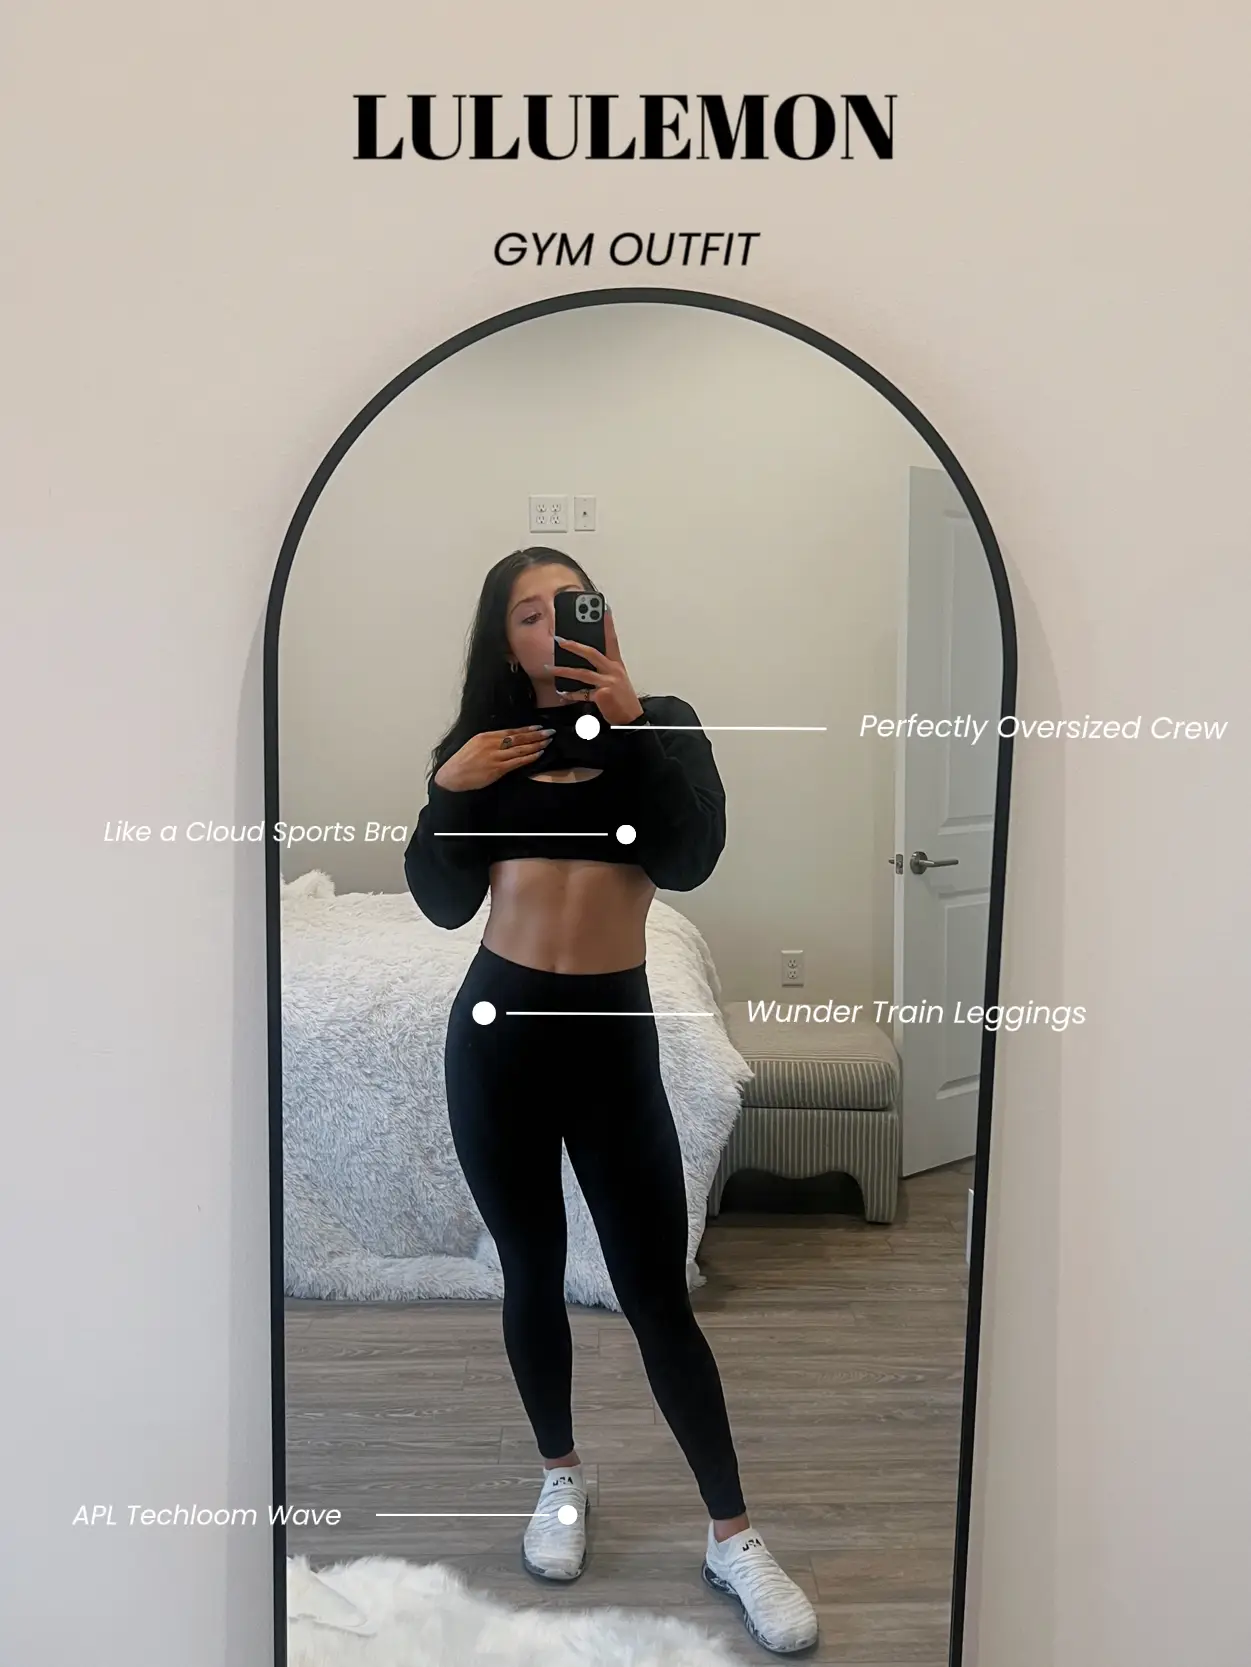 LULULEMON Gym Outfit, Gallery posted by Faithjudson